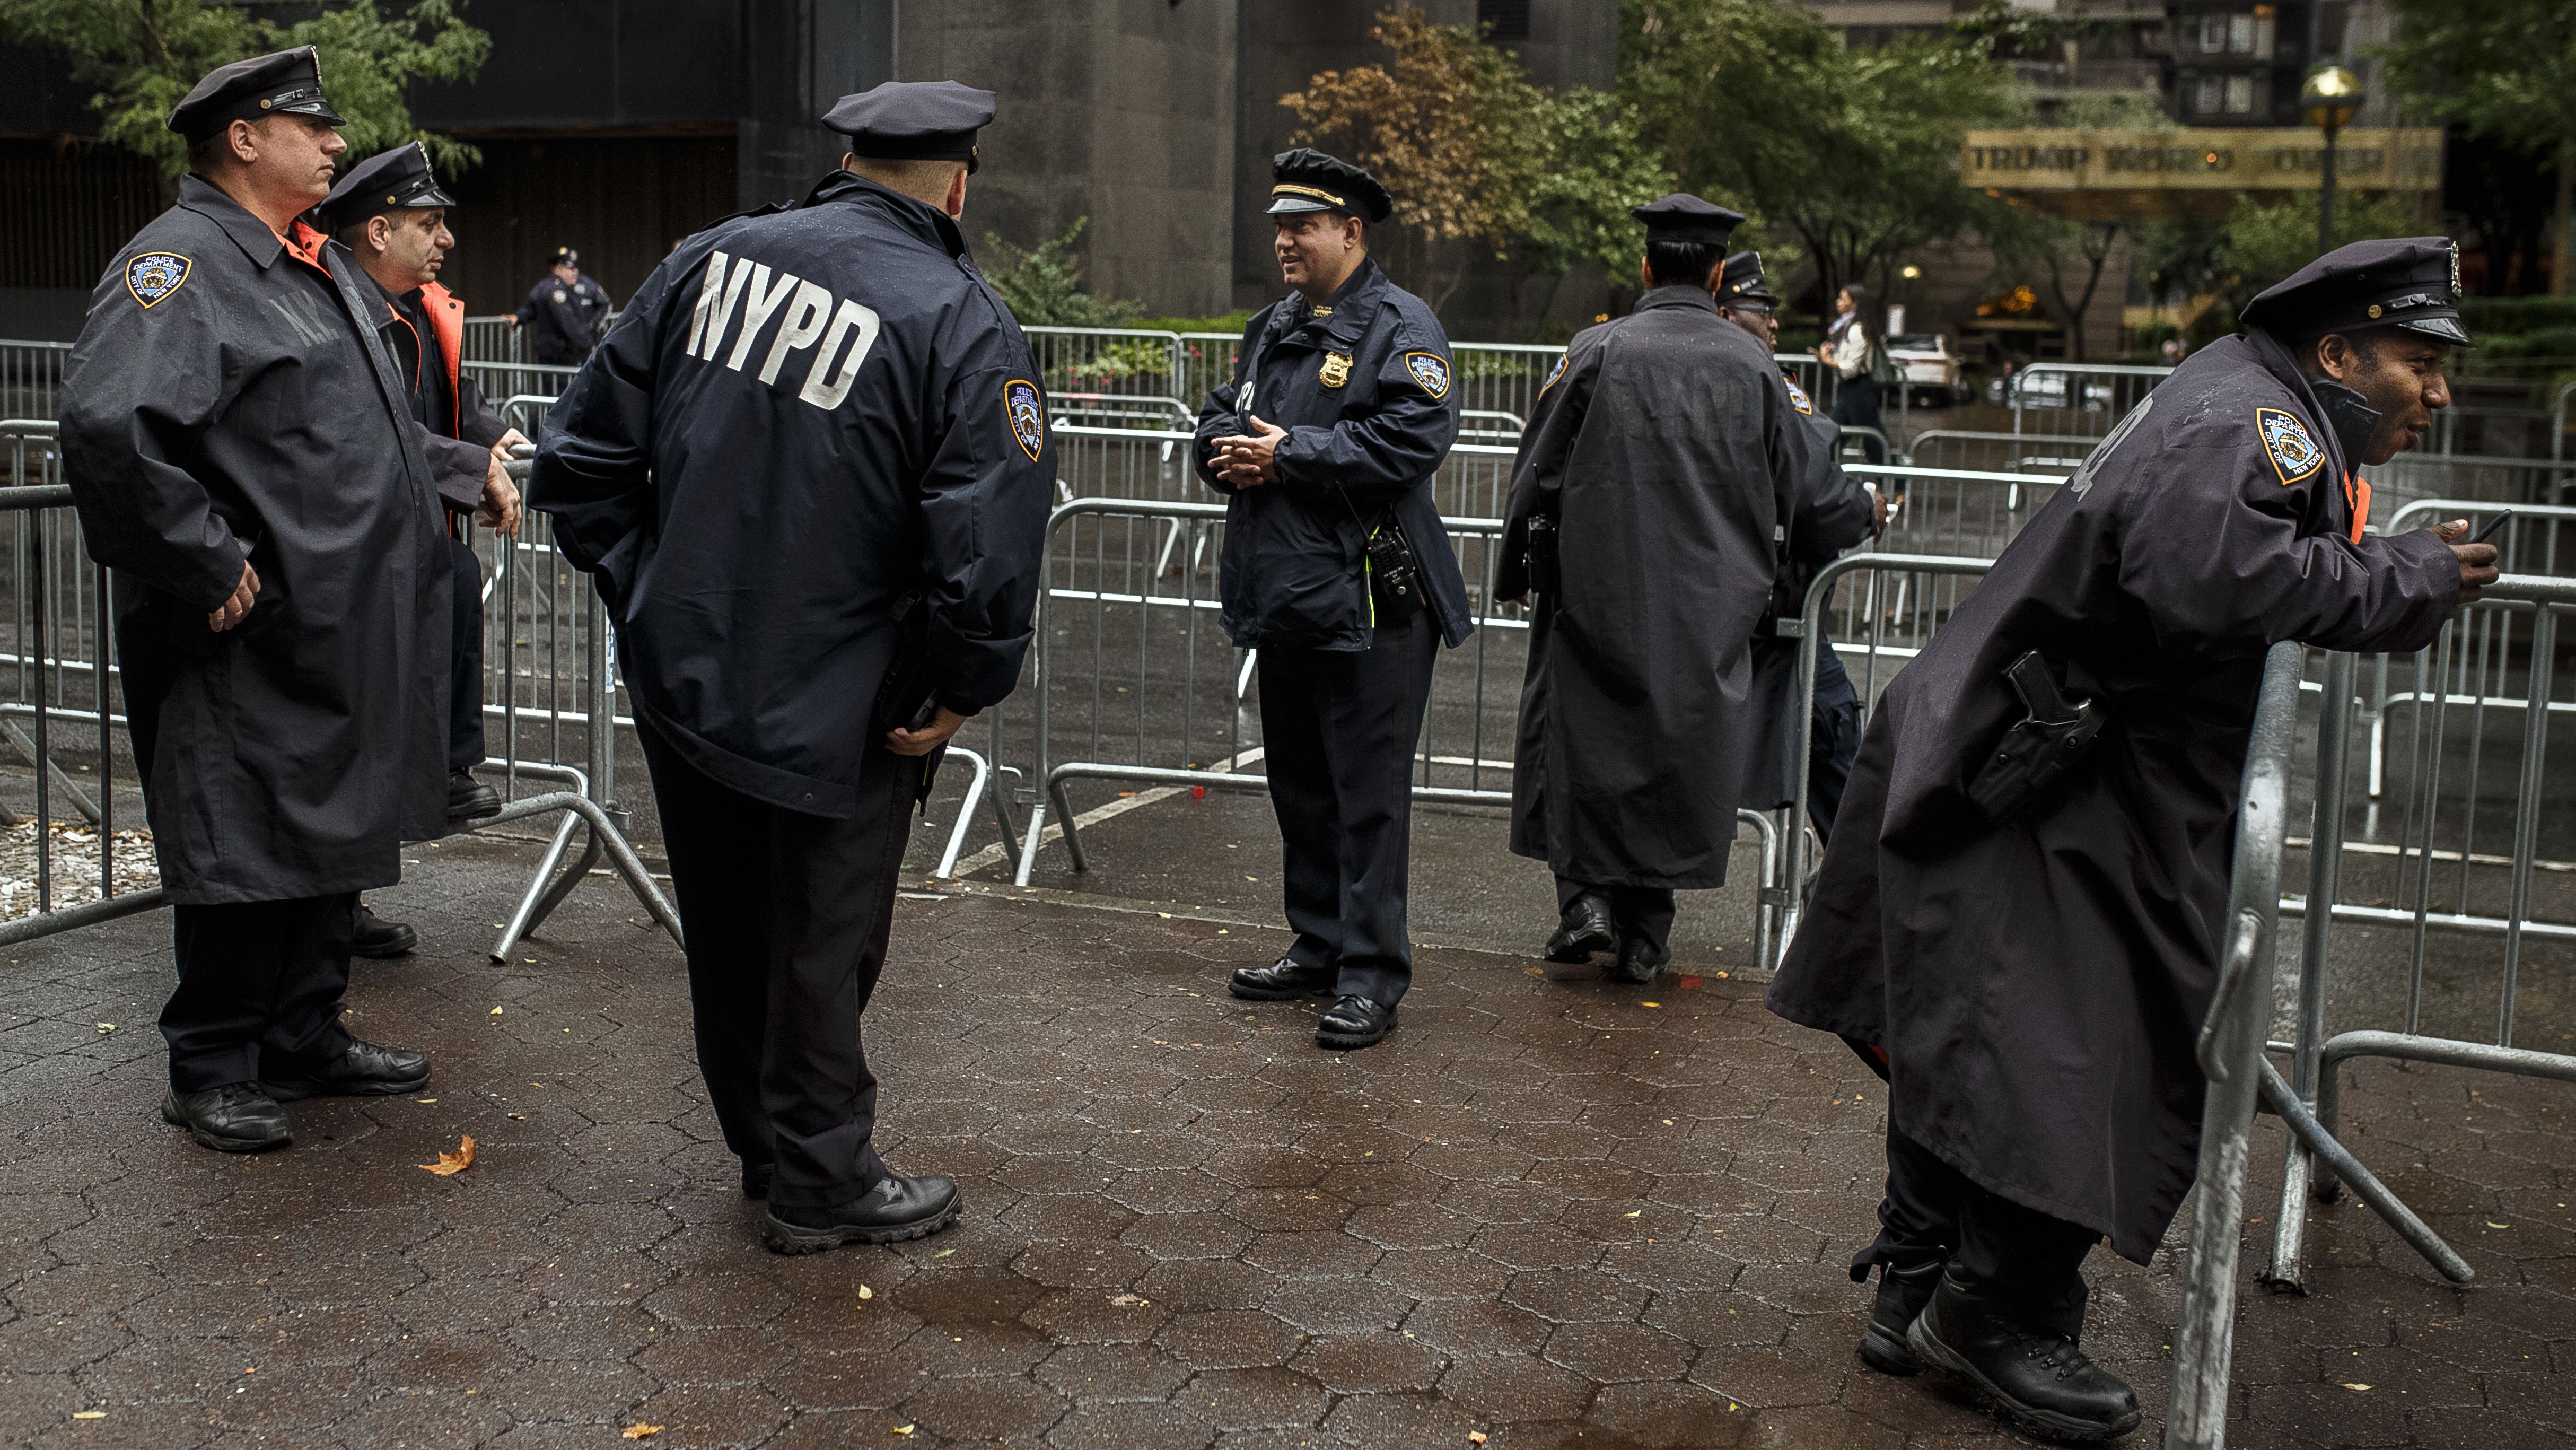 Police stand guard in front of UN headquarters on Tuesday.